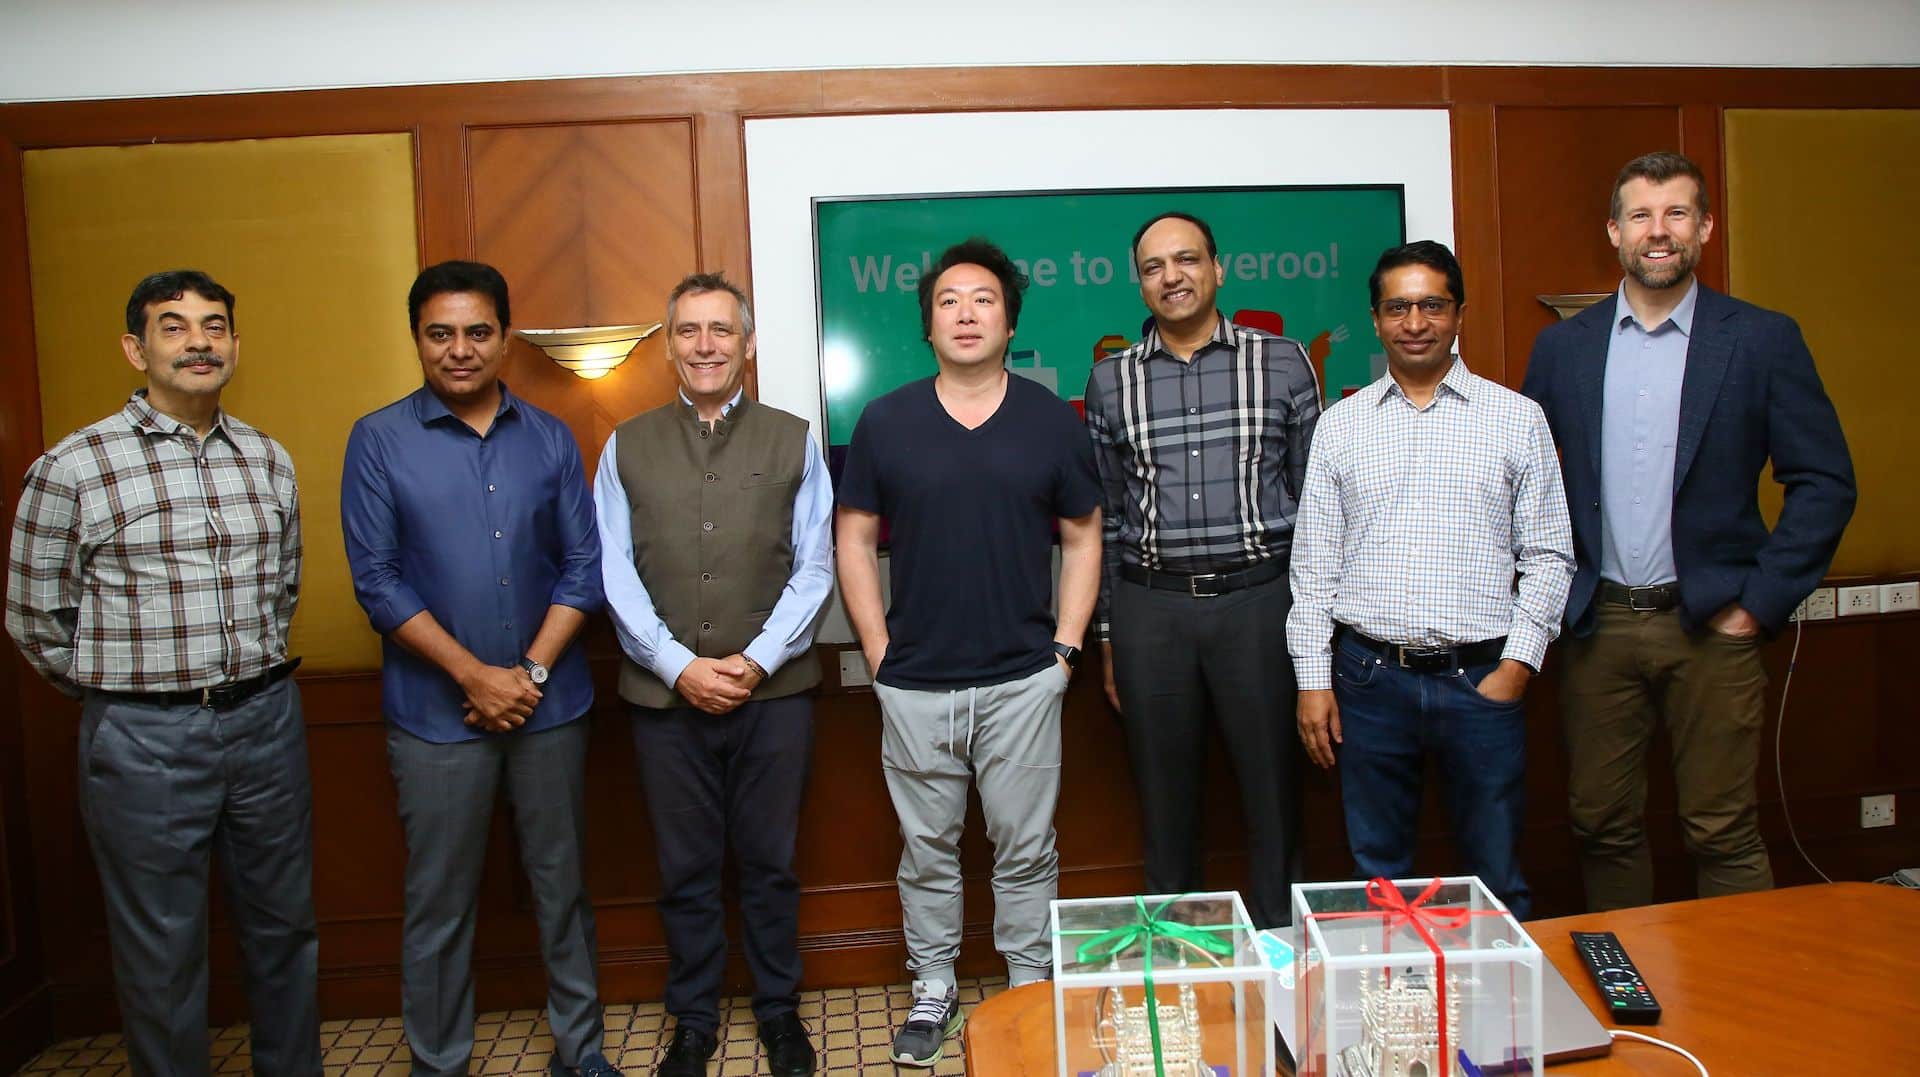 Deliveroo CEO Visits India Development Centre to Mark Anniversary of Hyderabad Tech Hub